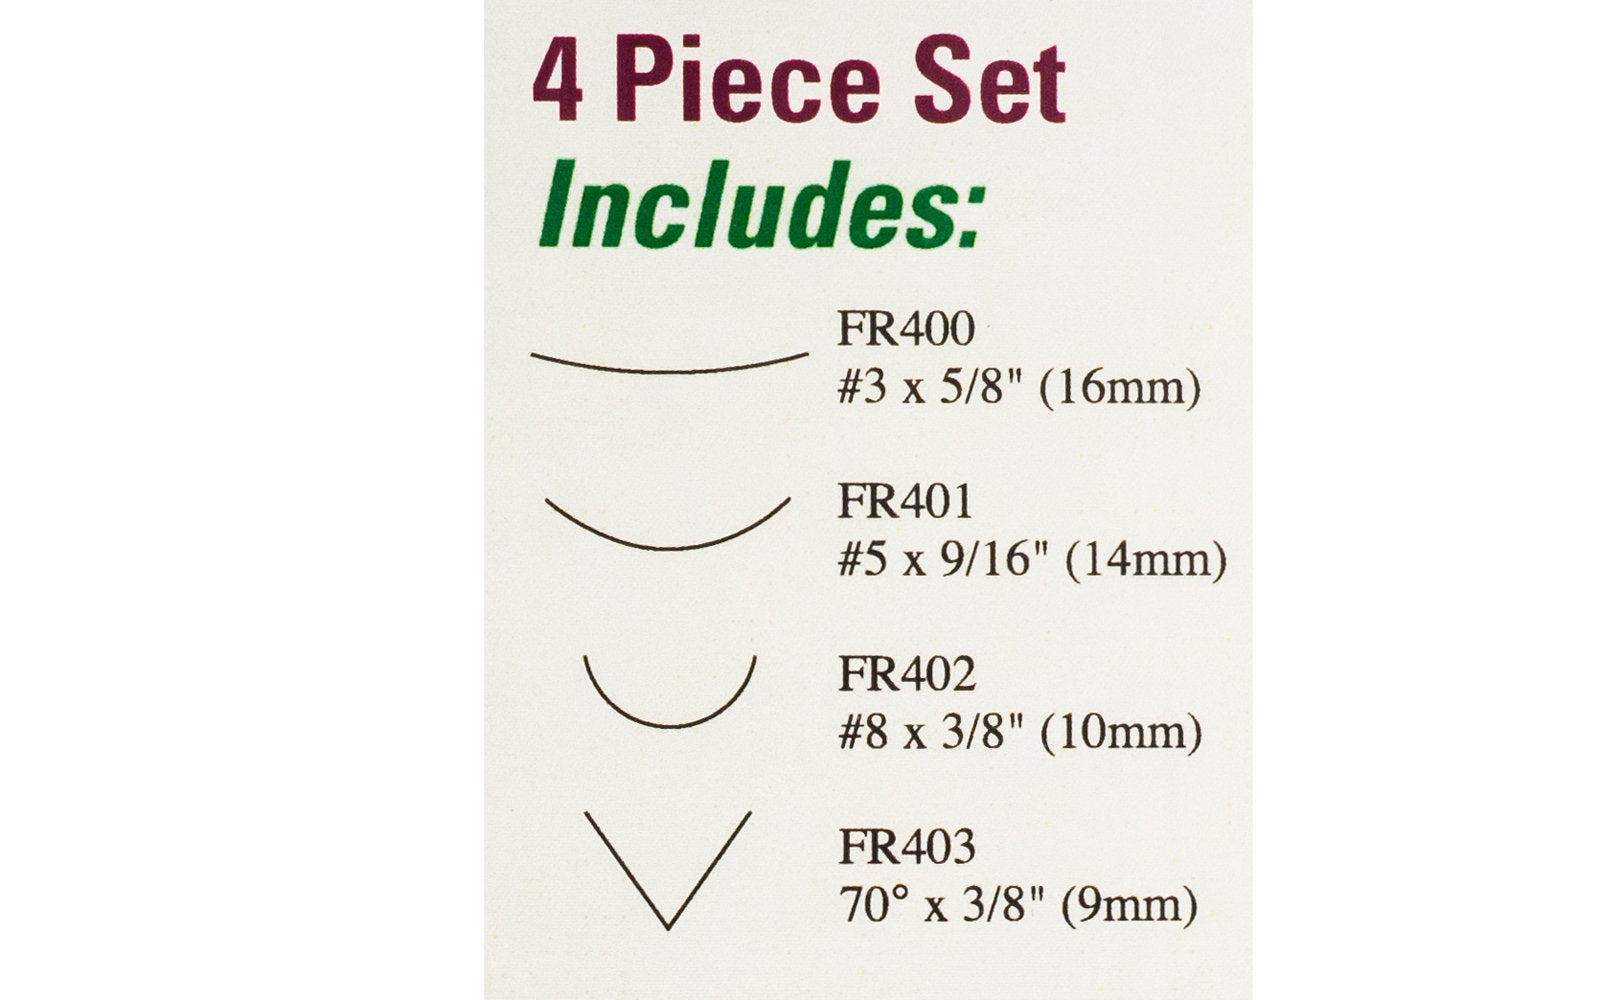 Flexcut Wide Palm Carving Set ~ FR404 - 4-piece set - Includes Sweep #3 x 5/8" (16 mm), Sweep #5 x 9/16" (14 mm), Gouge #8 x 3/8" (10 mm), Parting V-Tool 70° x 3/8" (9mm) - High Carbon Steel blades - Ash wood handles - Palm Carving Tool Set - Made in USA